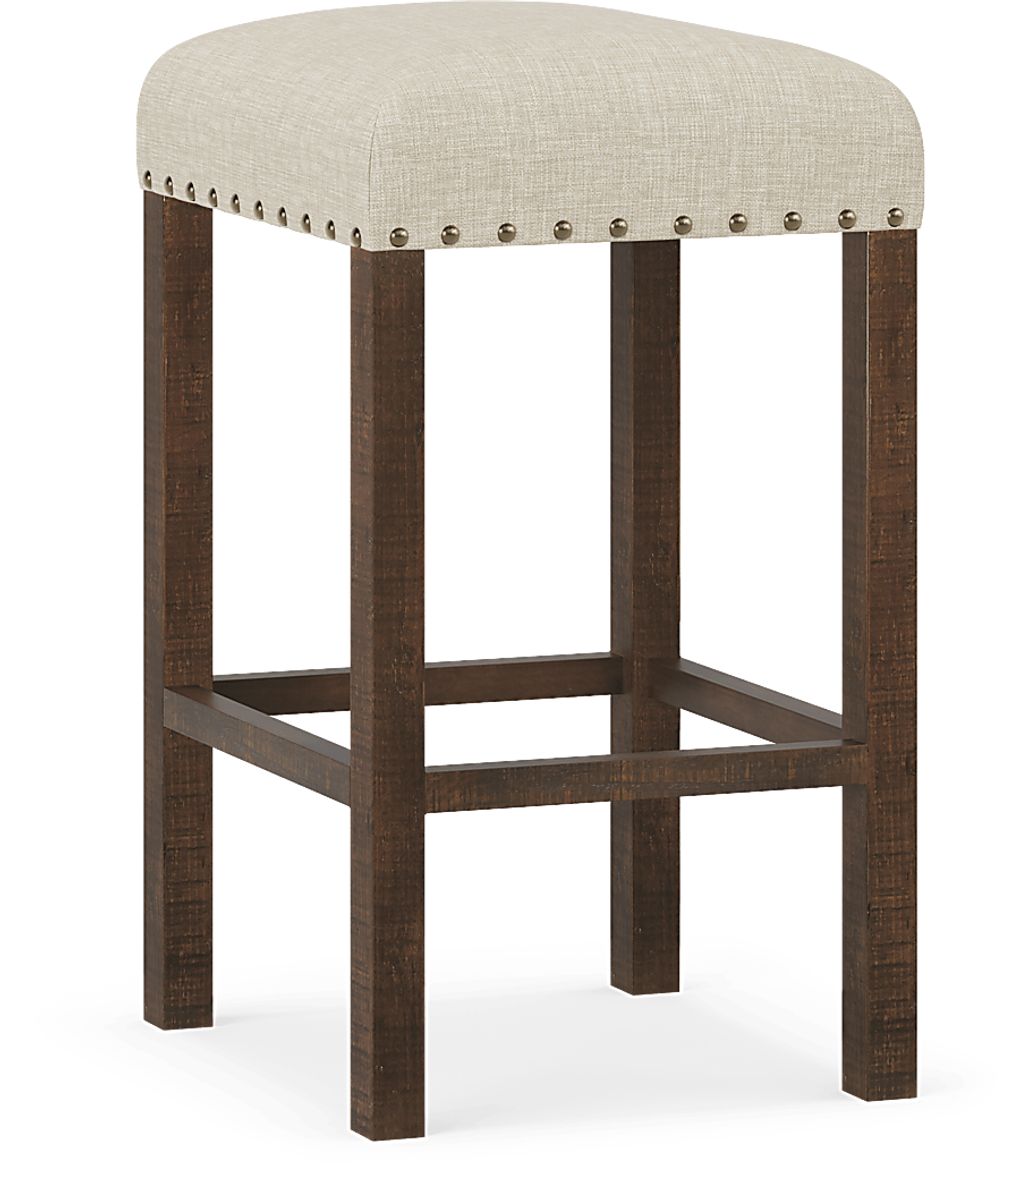 Cindy Crawford Home Westover Hills Brown Bar Height Stool